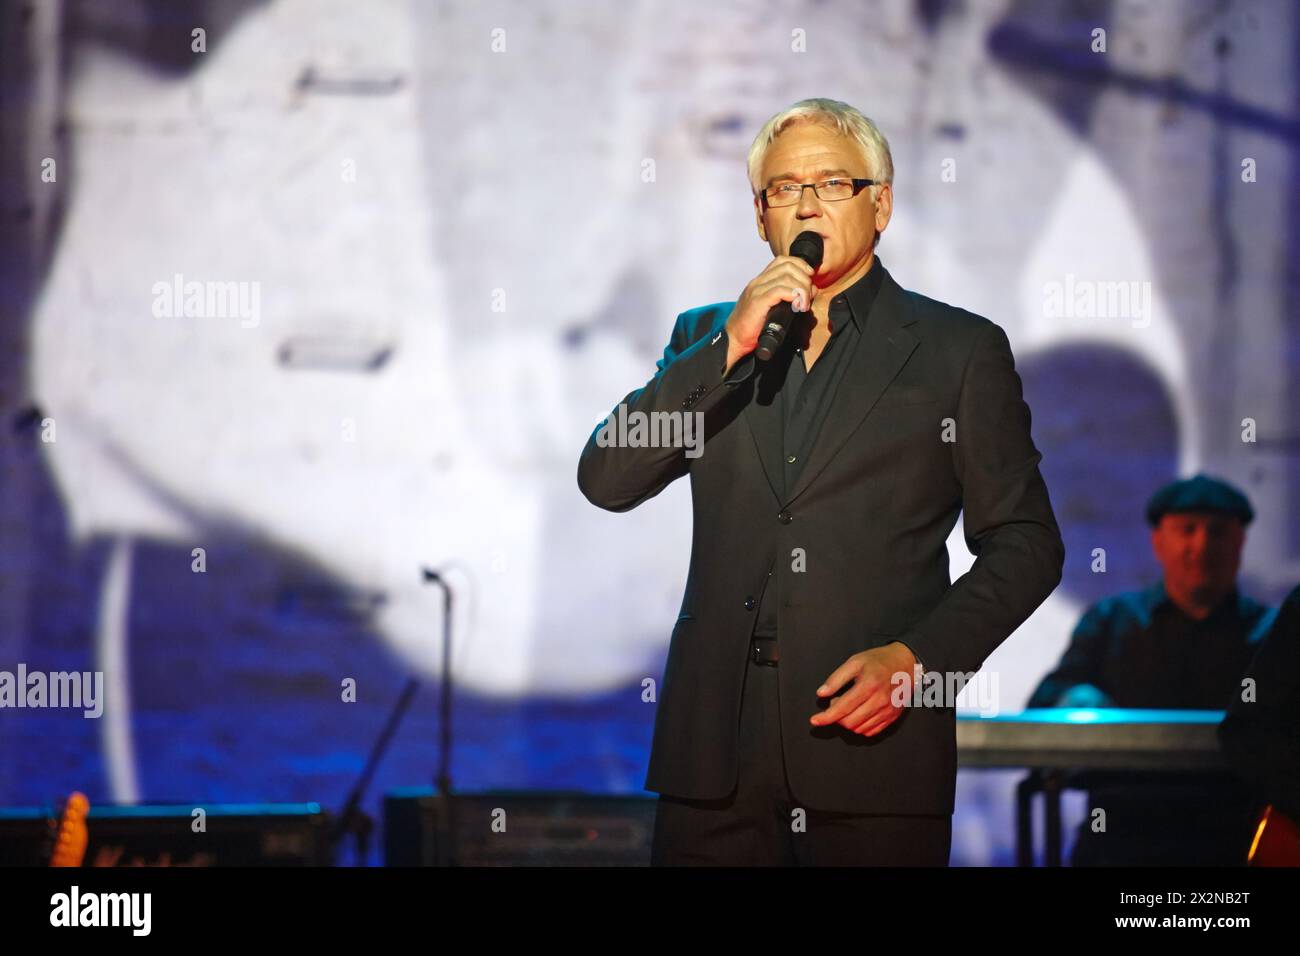 MOSCOW - JAN 23: Singer Alexander Marshall performs on stage at Taganka Theater during Award ceremony of Prize named after Vladimir Vysotsky Own Track Stock Photo